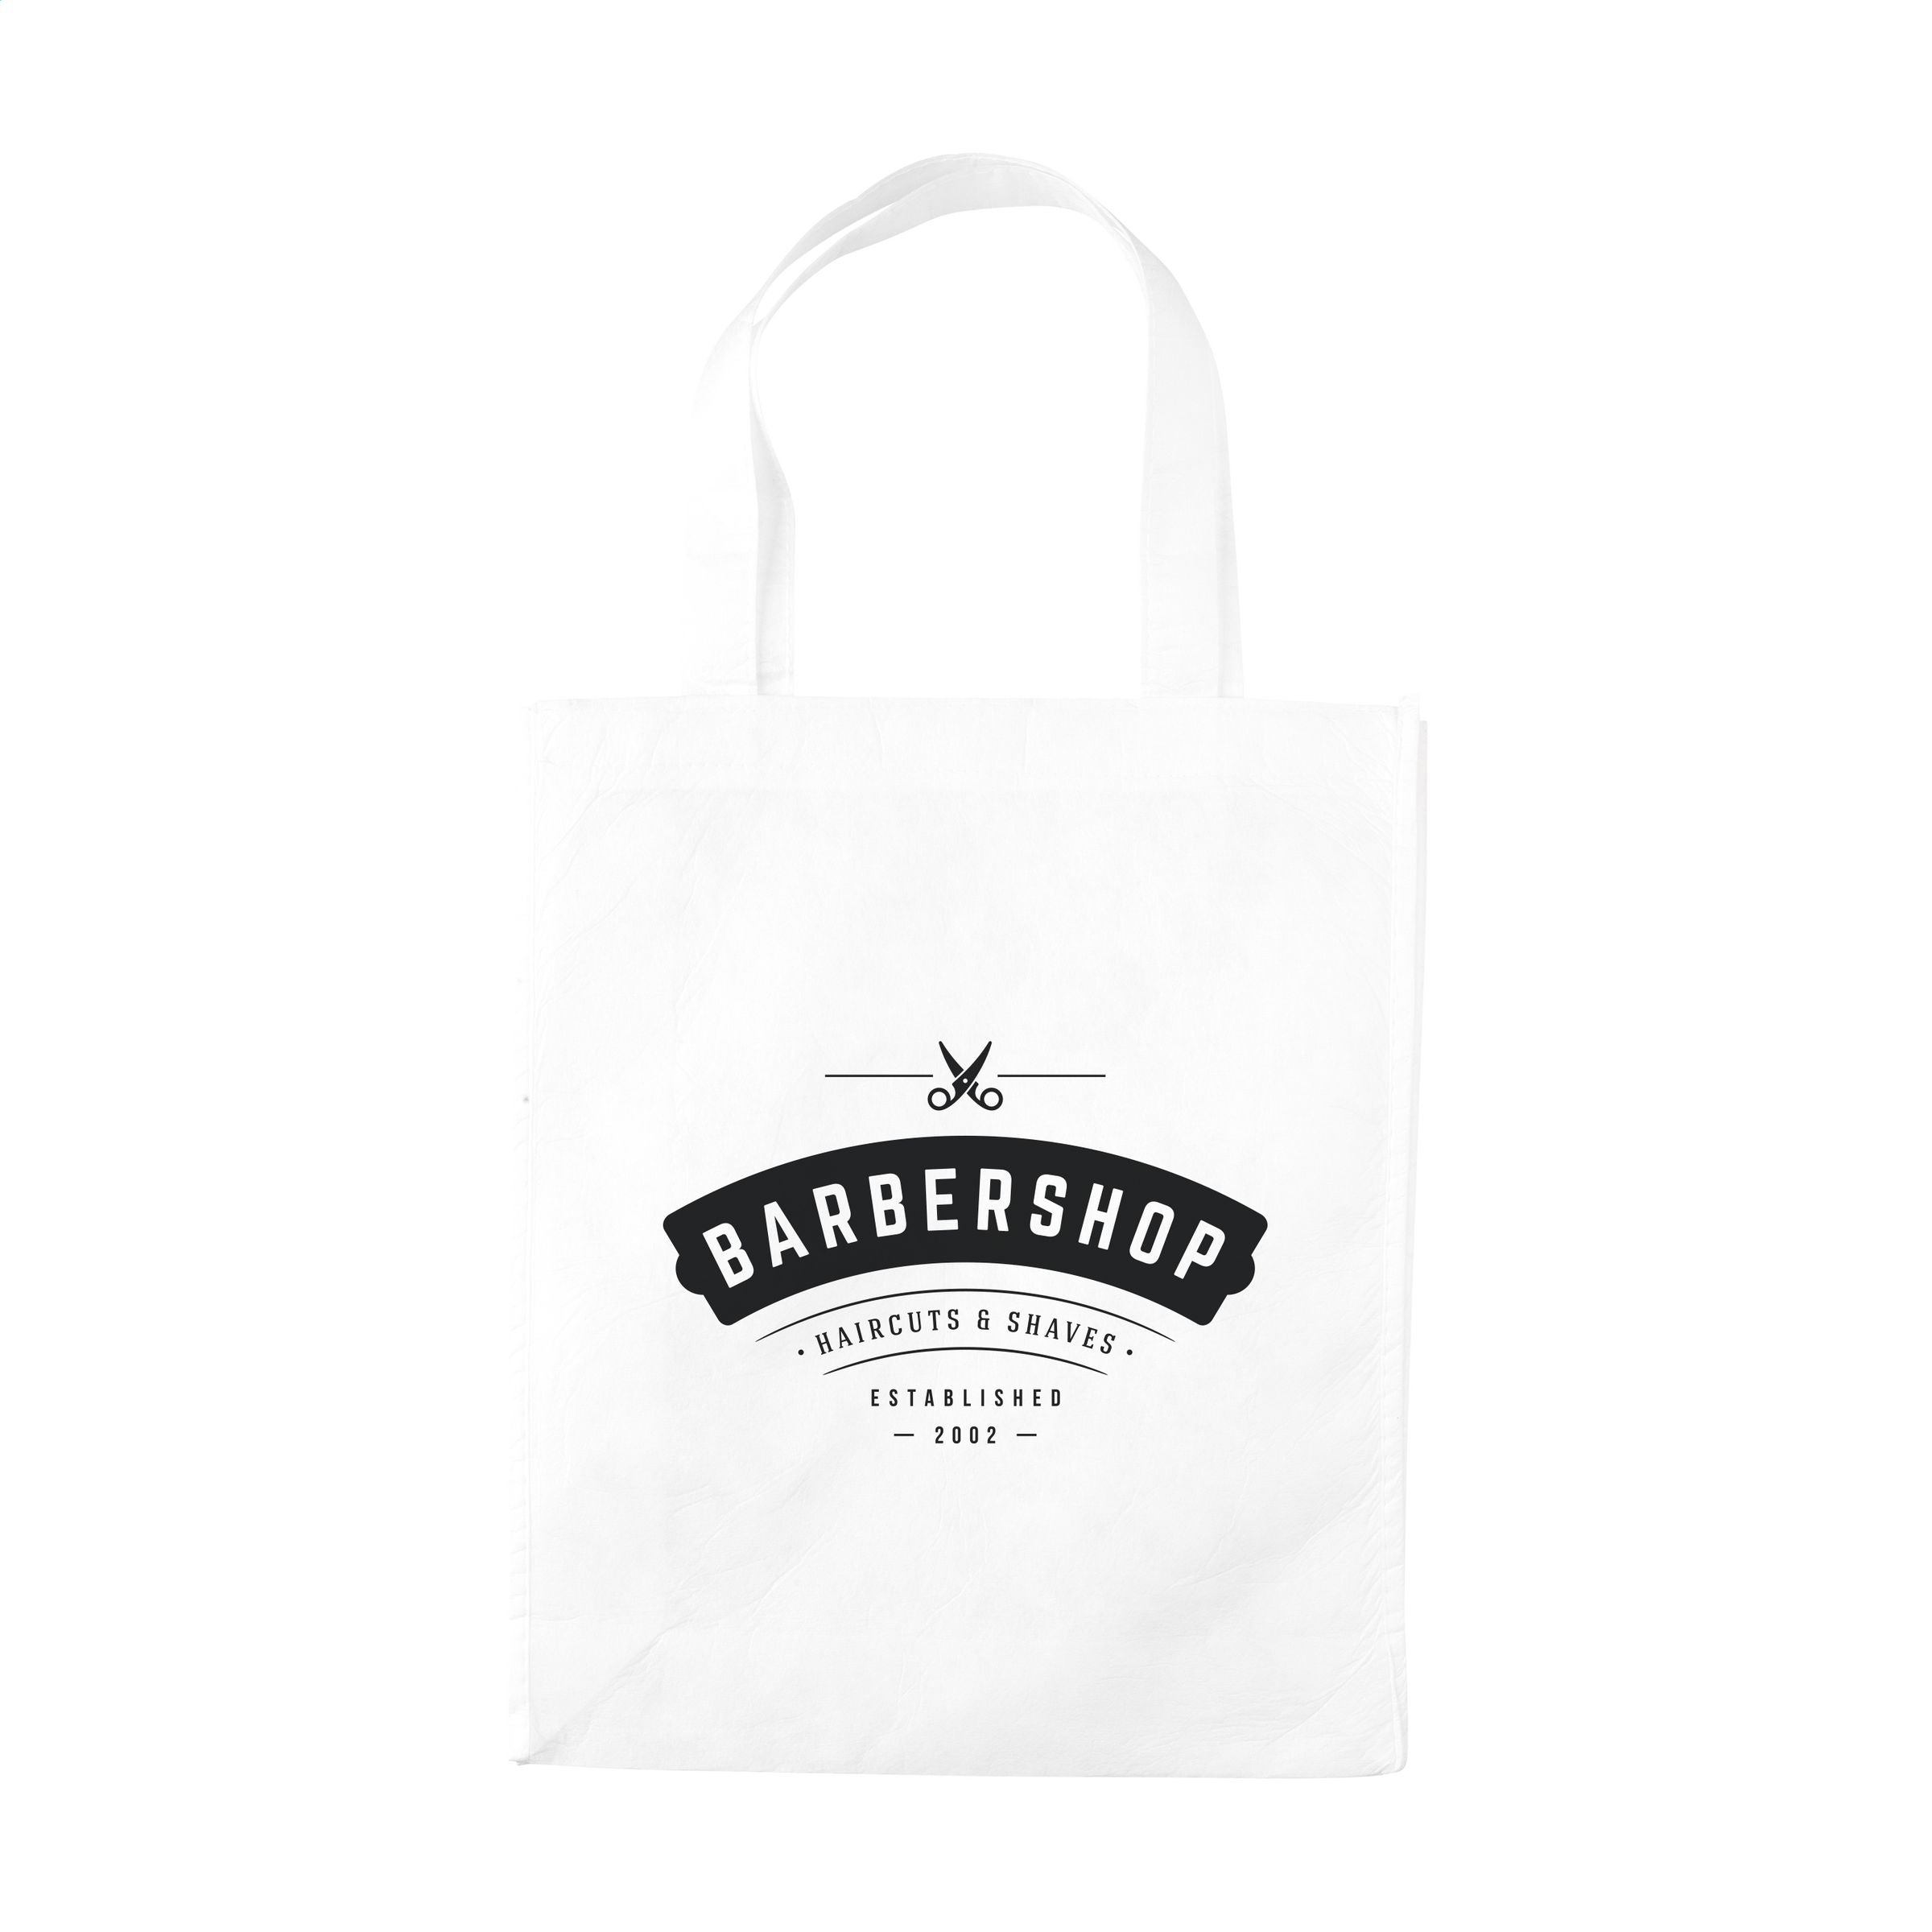 Water Soluble Branded Shopping Bag